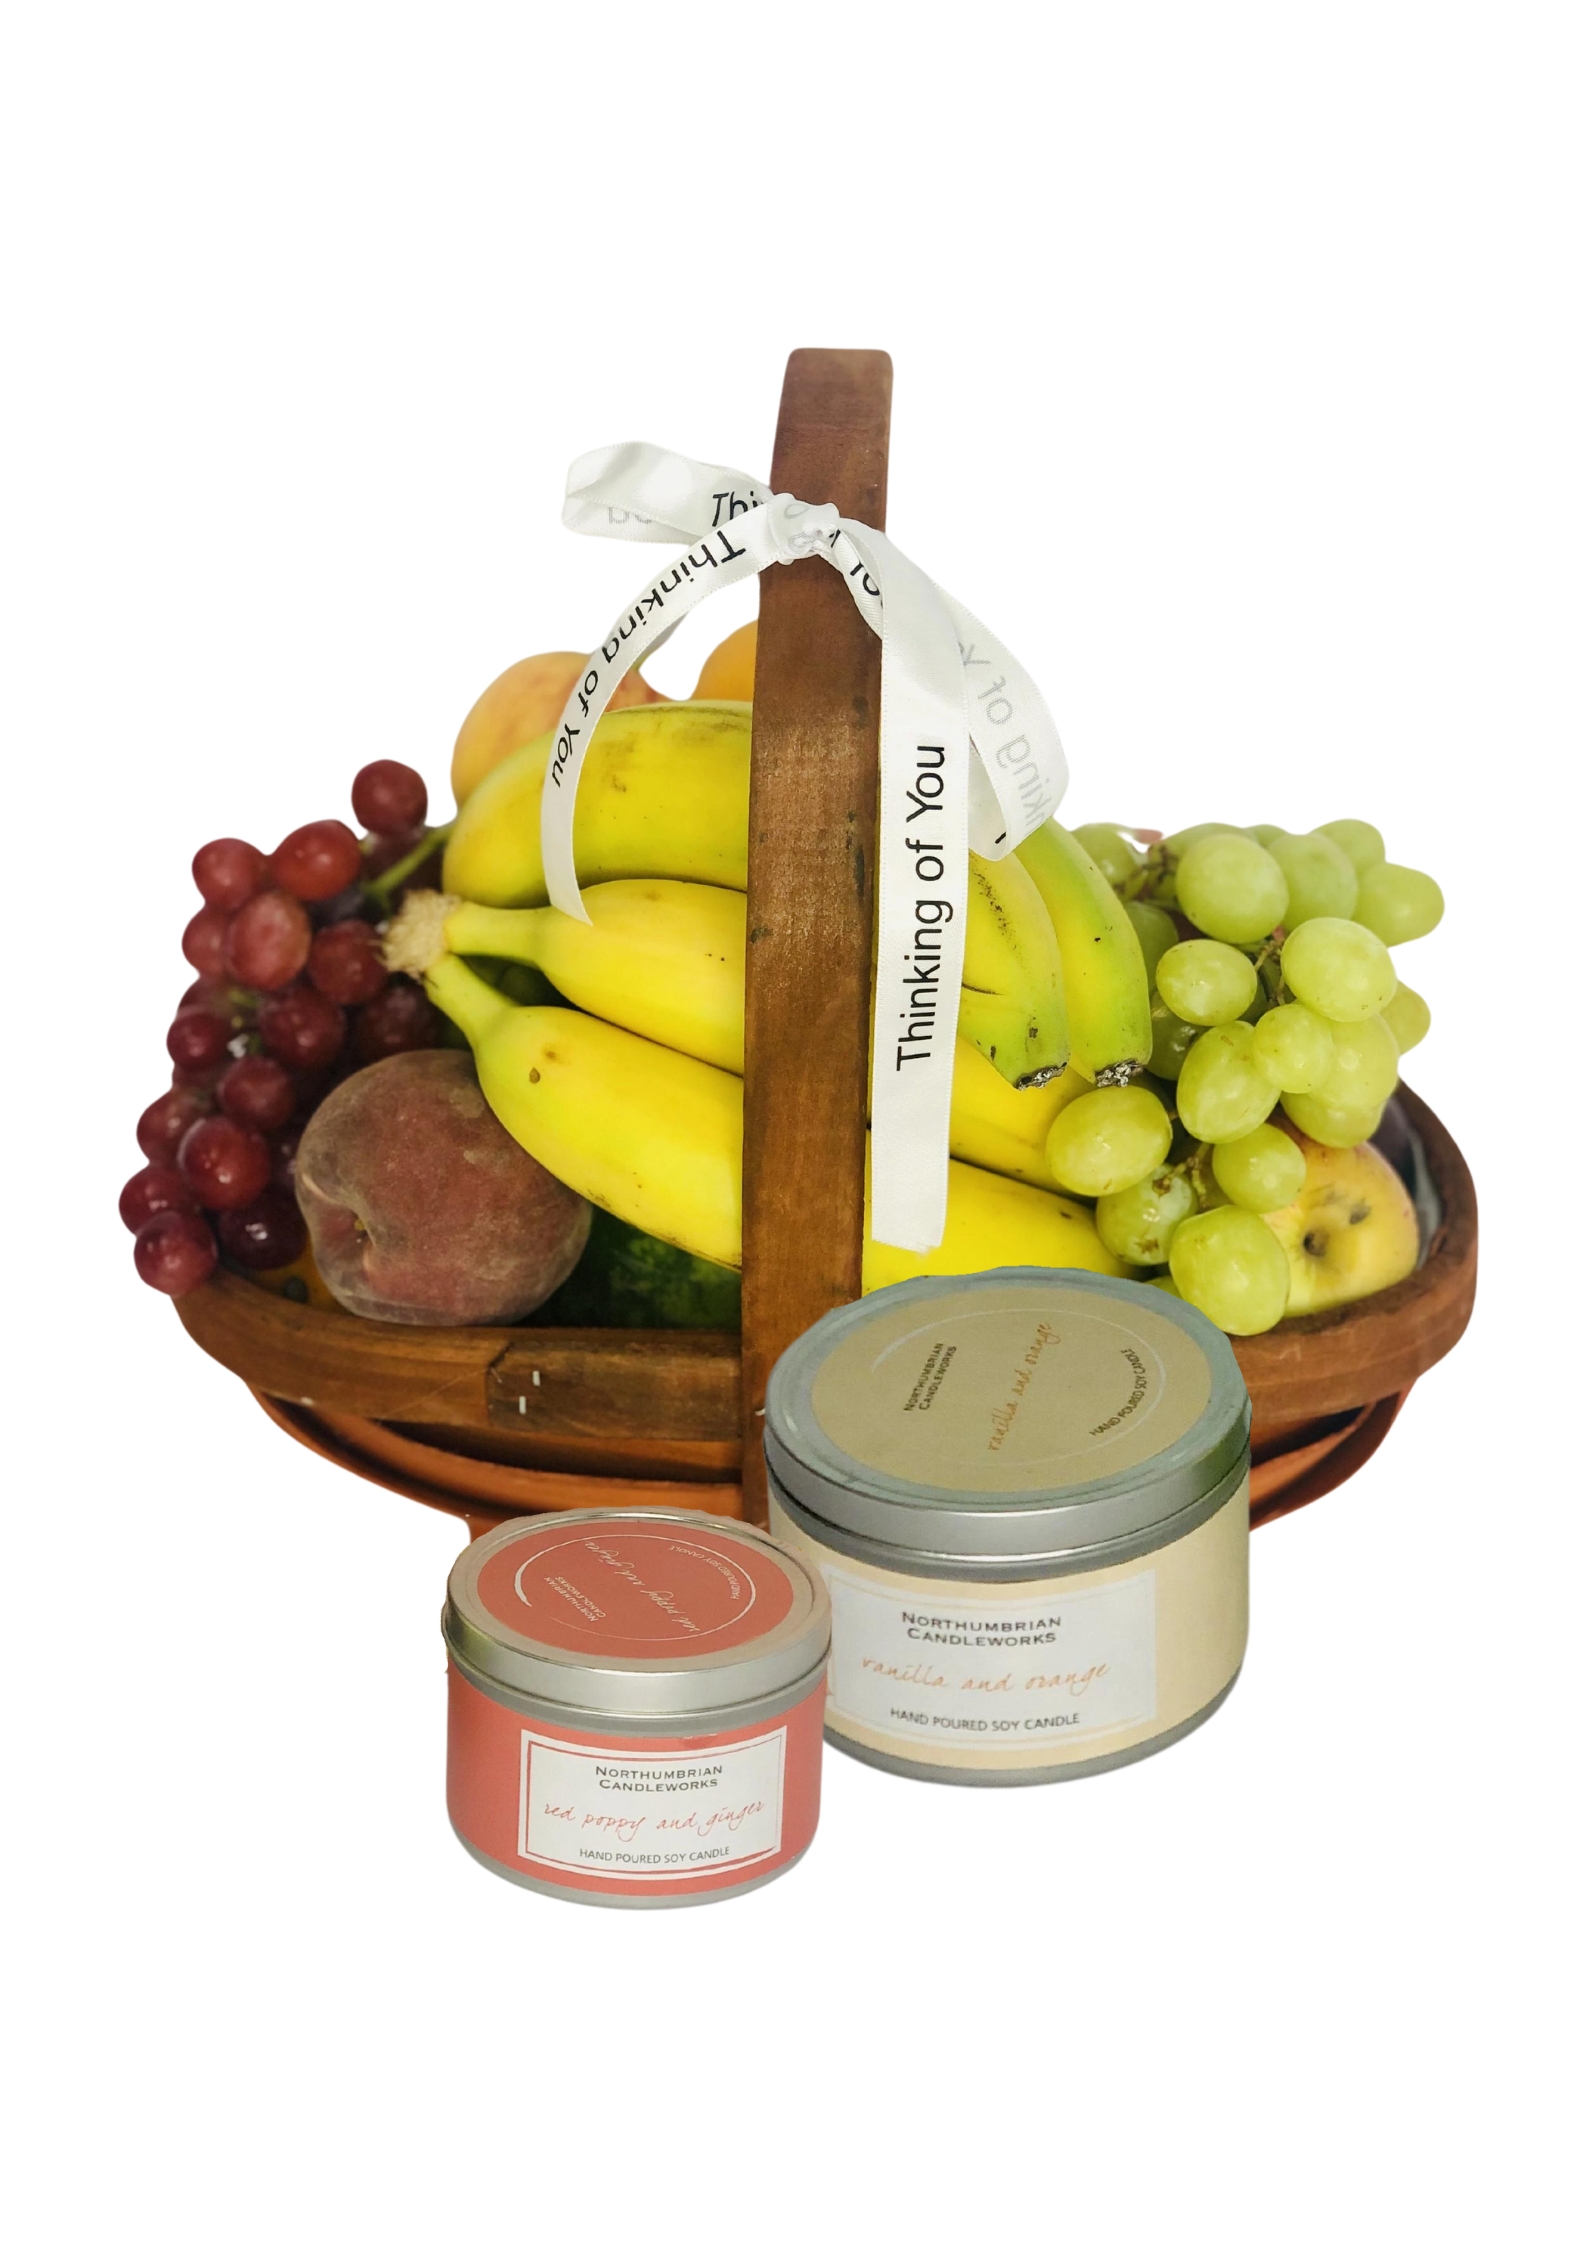 <h2>Fruit Basket with Chocolates and Scented Candle</h2>
<br>
<ul>
<li>Get Well Soon Gift Set</li>
<li>Fresh Fruit Basket together with Candle and Chocolates</li>
<li>Fruit in basket is subject to seasonality</li>
<li>For delivery area coverage see below</li>
</ul>
<br>
<h2>Flower Delivery Coverage</h2>
<p>Our shop delivers flowers to the following Liverpool postcodes L1 L2 L3 L4 L5 L6 L7 L8 L11 L12 L13 L14 L15 L16 L17 L18 L19 L24 L25 L26 L27 L36 L70 If your order is for an area outside of these we can organise delivery for you through our network of florists. We will ask them to make as close as possible to the image but because of the difference in stock and sundry items it may not be exact.</p>
<br>
<h2>Fruit Basket | Gift Set</h2>
<br>
<p>A fruit basket is a lovely alternative to sending flowers and can be sent for a lady or a gentleman to let them know you are thinking of them.</p>
<br>
<p>This Get Well Soon Gift Set contains a basket of fresh fruit, together with a eco-friendly soy scented candle in scent Fresh Green Apple which comes in a stylish tin together with a 115g box of luxury Maison Fougere Belgian Chocolates.</p>
<br>
<p>The fruit basket contains a generous selection of delicious fresh fruit which is presented in an open willow basket. A classic gift for any occasion this selection of fine fruits is sure to raise a smile. Fruit in the basket will vary depending on the season.</p>
<br>
<p>To ensure your gift is of the highest quality, the contents of the fruit basket may vary due to seasonality.</p>
<br>
<h2>Eco-Friendly Liverpool Florists</h2>
<p>As florists we feel very close earth and want to protect it. Plastic waste is a huge problem in the florist industry so we made the decision to make our packaging eco-friendly.</p>
<p>To achieve this we worked with our packaging supplier to remove the lamination off our boxes and wrap the tops in an Eco Flowerwrap which means it easily compostable or can be fully recycled.</p>
<p>Once you have finished enjoying your flowers from us they will go back into growing more flowers! Only a small amount of plastic is used as a water bubble and this is biodegradable.</p>
<p>Even the sachet of flower food included with your bouquet is compostable.</p>
<p>All our bouquets have small wooden ladybird hidden amongst them so do not forget to spot the ladybird and post a picture on our social media pages to enter our rolling competition.</p>
<br>
<h2>Flowers Guaranteed for 7 Days</h2>
<p>Our 7-day freshness guarantee should give you confidence that we will only send out good quality flowers.</p>
<p>Leave it in our hands we will create a marvellous bouquet which will not only look good on arrival but will continue to delight as the flowers bloom.</p>
<br>
<h2>Liverpool Flower Delivery</h2>
<p>We are open 7 days a week and offer advanced booking flower delivery same-day flower delivery 3-hour flower delivery. Guaranteed AM PM or Evening Flower Delivery and also offer Sunday Flower Delivery.</p>
<p>Our florists deliver in Liverpool and can provide flowers for you in Liverpool Merseyside. And through our network of florists can organise flower deliveries for you nationwide.</p>
<br>
<h2>The Best Florist in Liverpool your local Liverpool Flower Shop</h2>
<p>Come to Booker Flowers and Gifts Liverpool for your beautiful flowers and plants. For that bit of extra luxury we also offer a lovely range of finishing touches such as wines champagne locally crafted Gin and Rum Vases Scented Candles and Chocolates that can be delivered with your flowers.</p>
<p>To see the full range see our extras section.</p>
<p>You can trust Booker Flowers and Gifts of delivery the very best for you.</p>
<p><br /><br /></p>
<p><em>5 Star review on Yell.com</em></p>
<br>
<p><em>Thank you Gemma for your fabulous service. The flowers are of the highest quality and delivered with a warm smile. My sister was delighted. Ordering was simple and the communications were top-notch. I will definitely use your services again.</em></p>